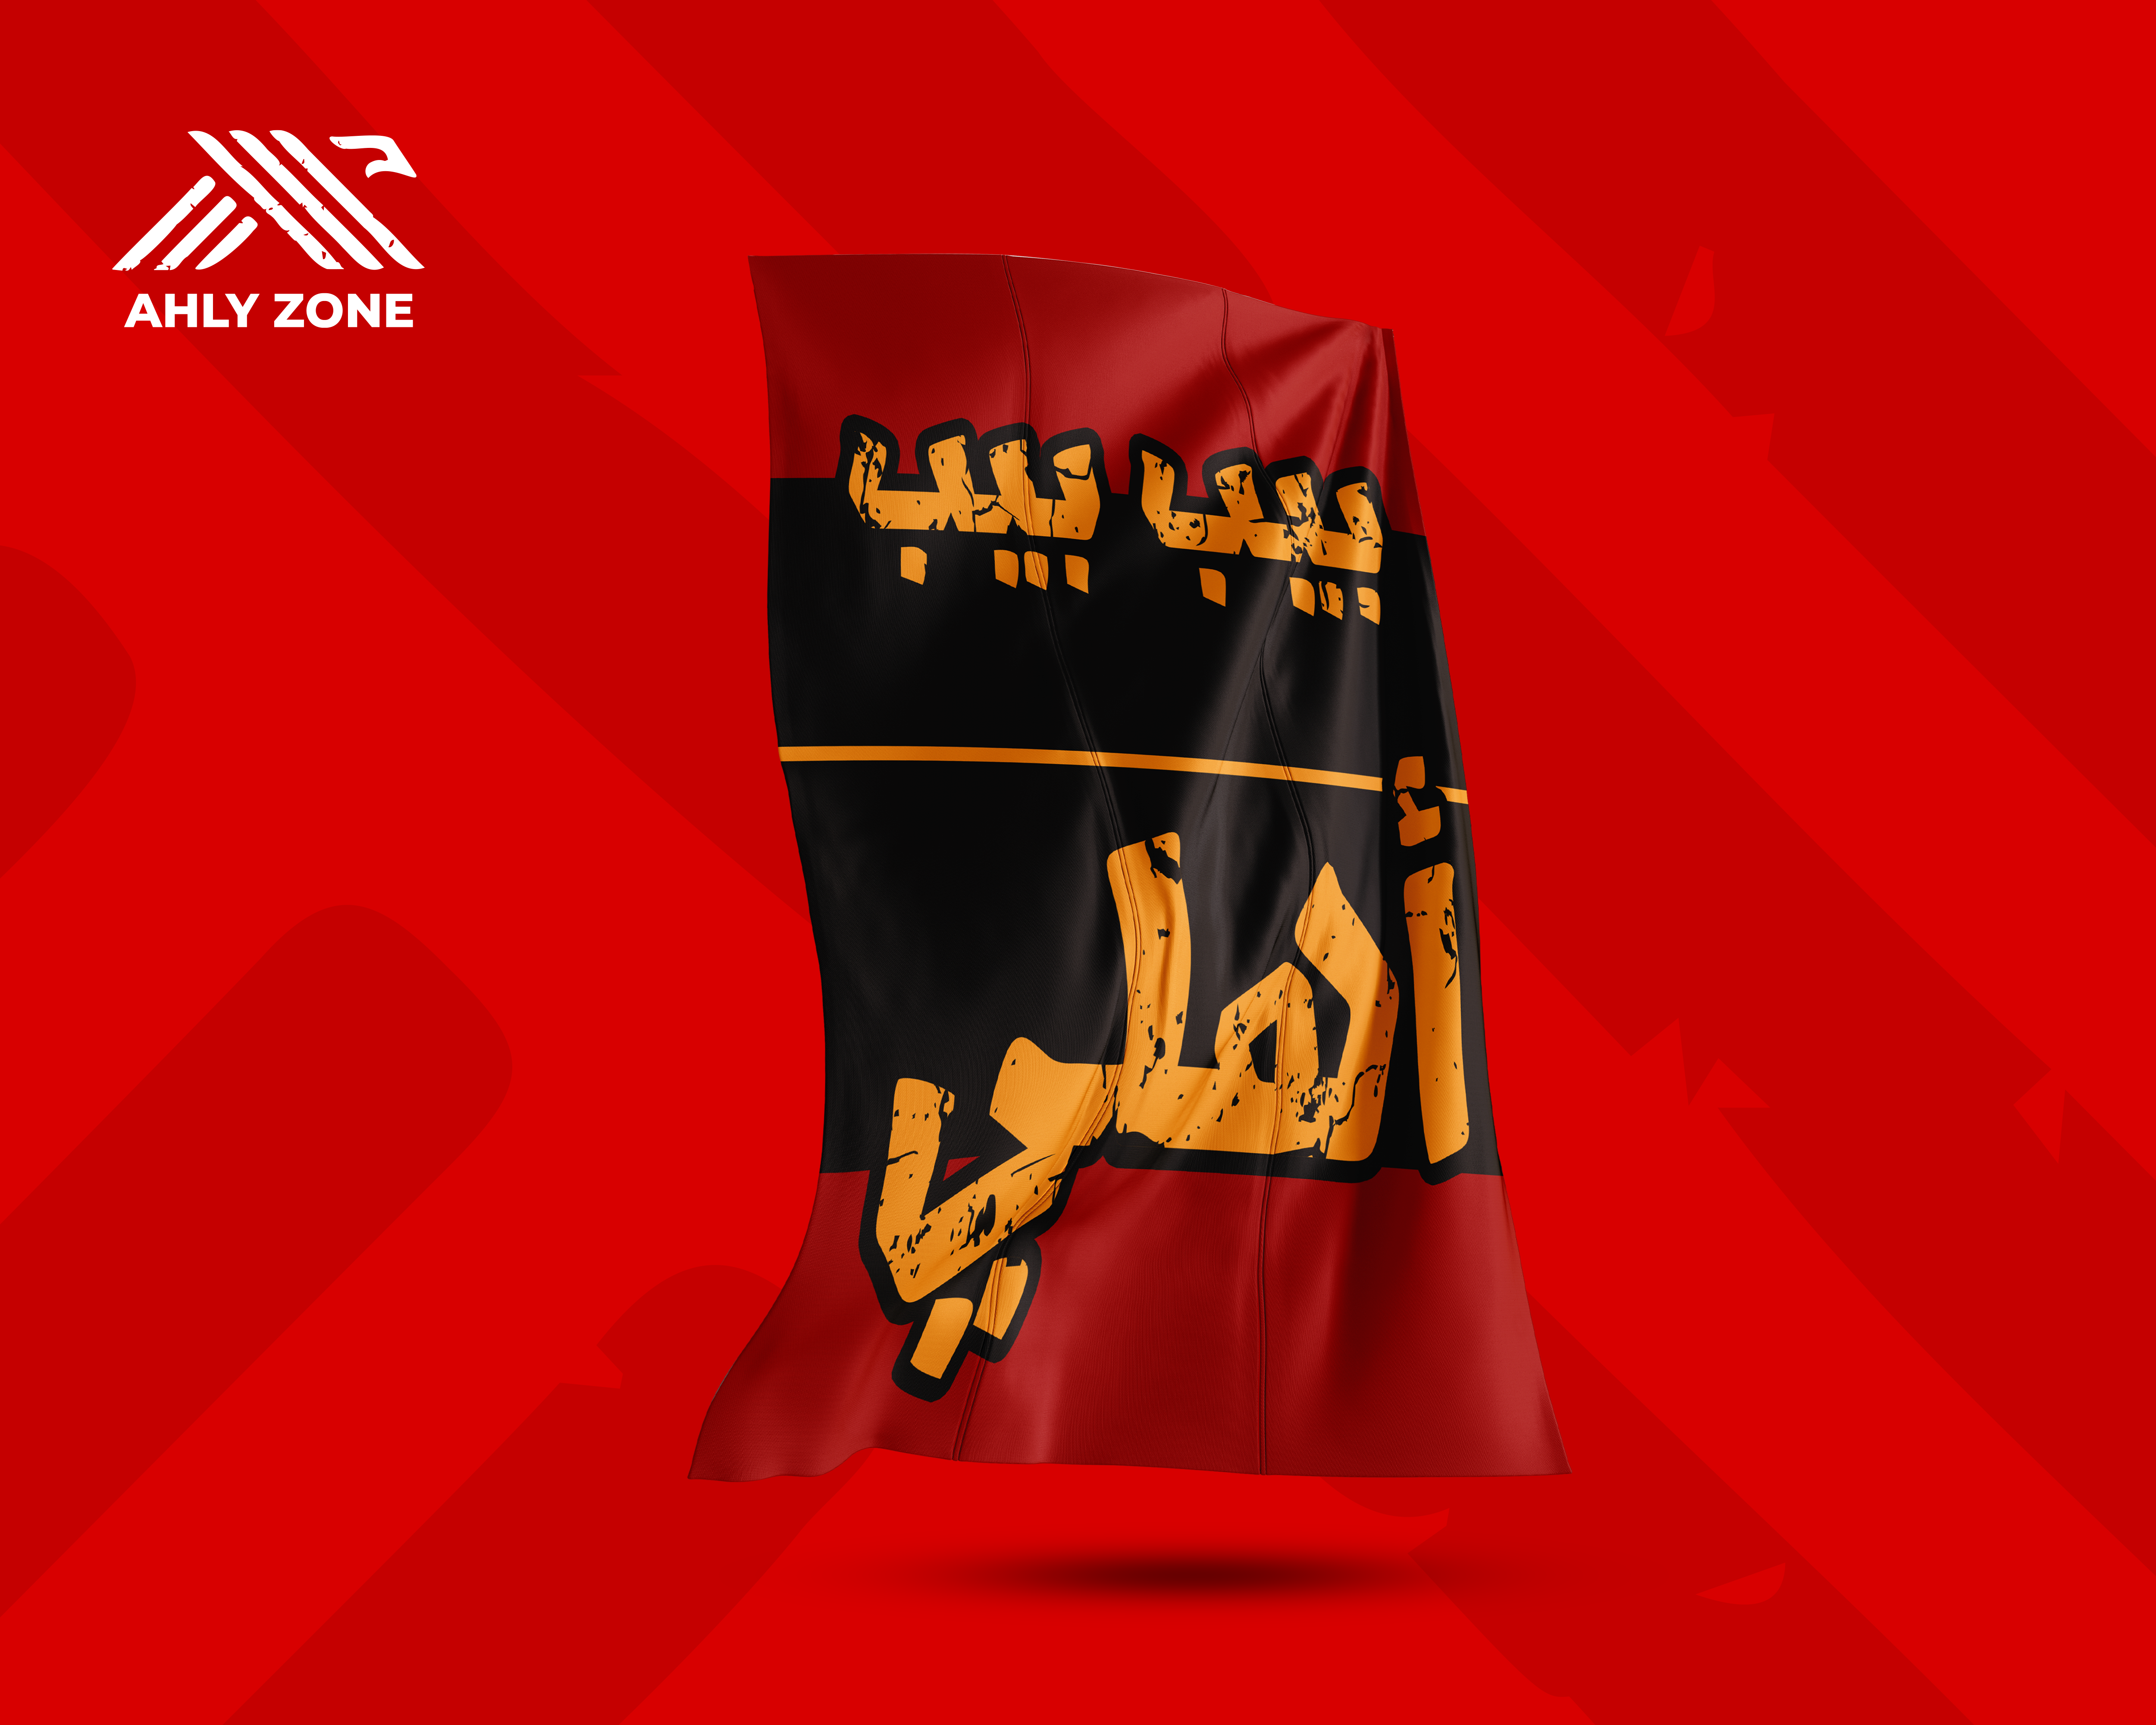 <p><strong><span style="color: #be8f27">"Beeb Beeb Ahly" Flag</span></strong></p>